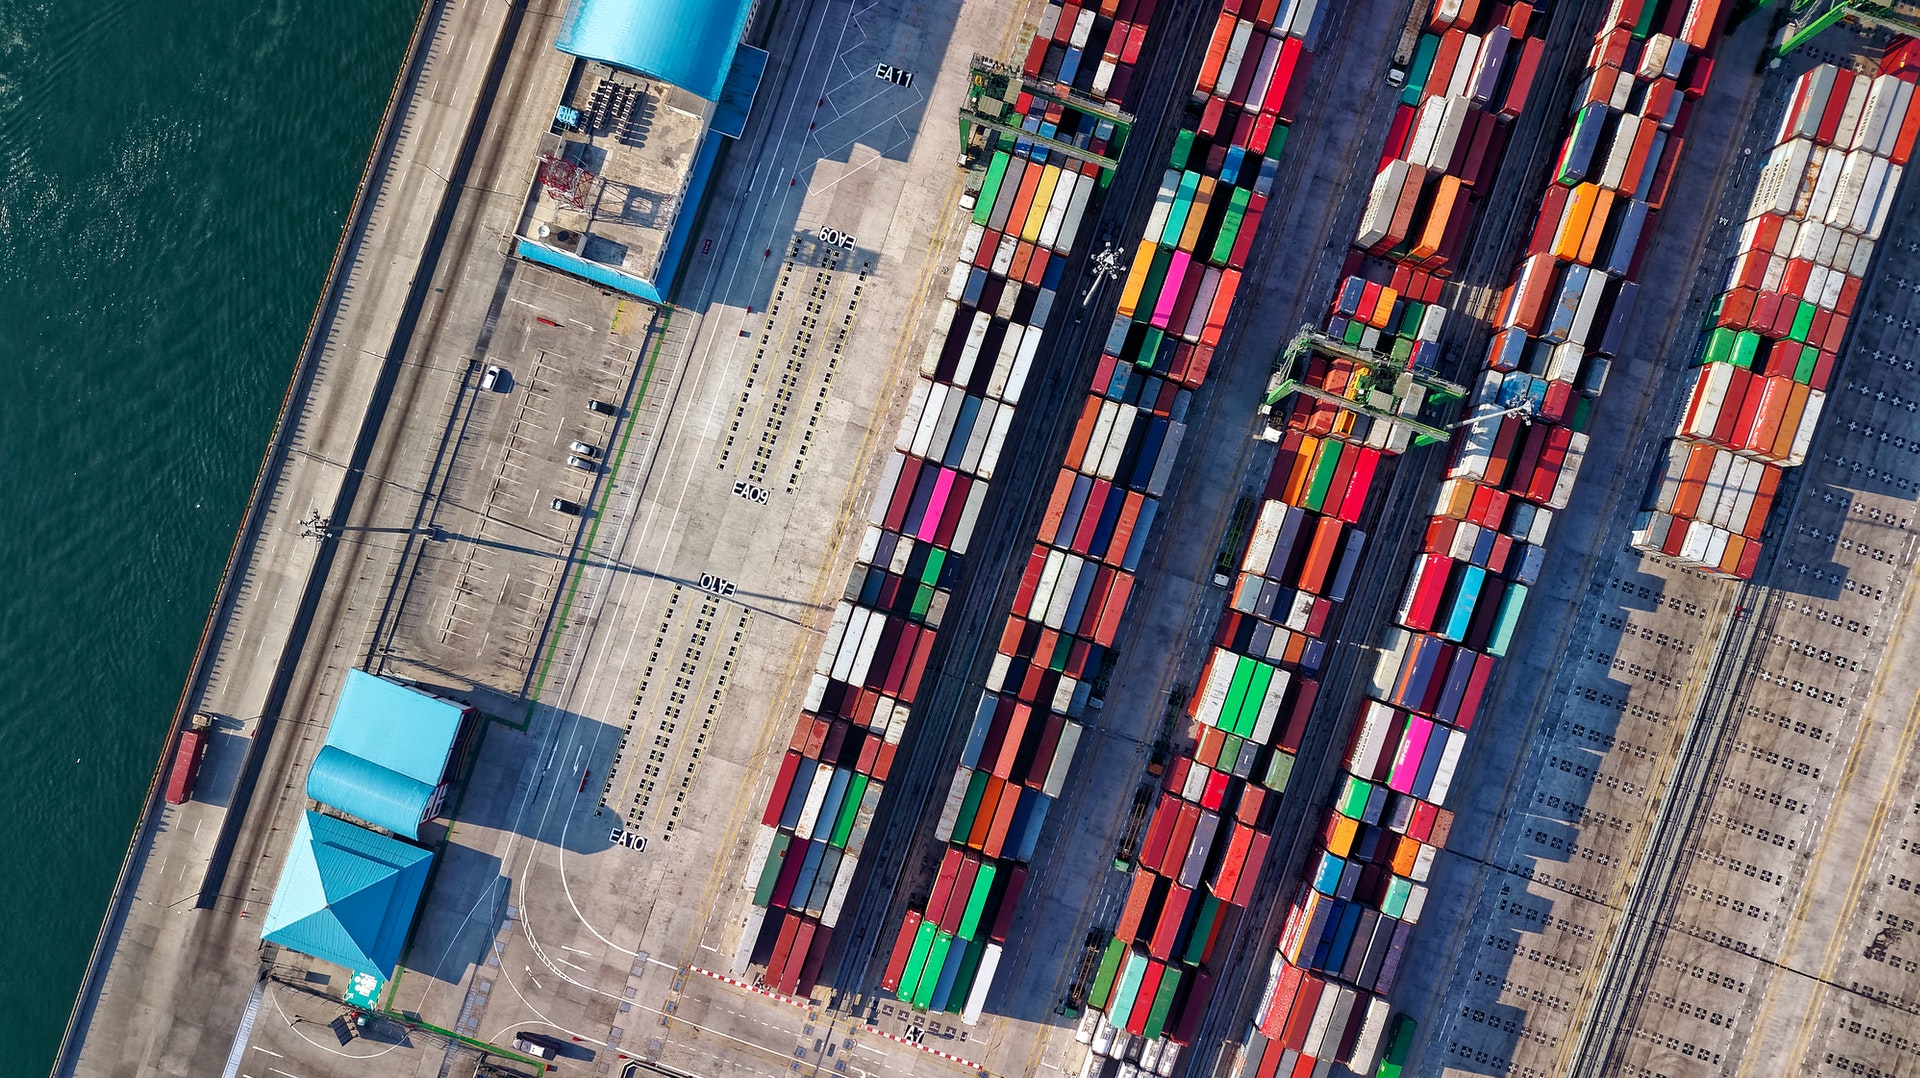 An overhead view of shipping containers on a barge